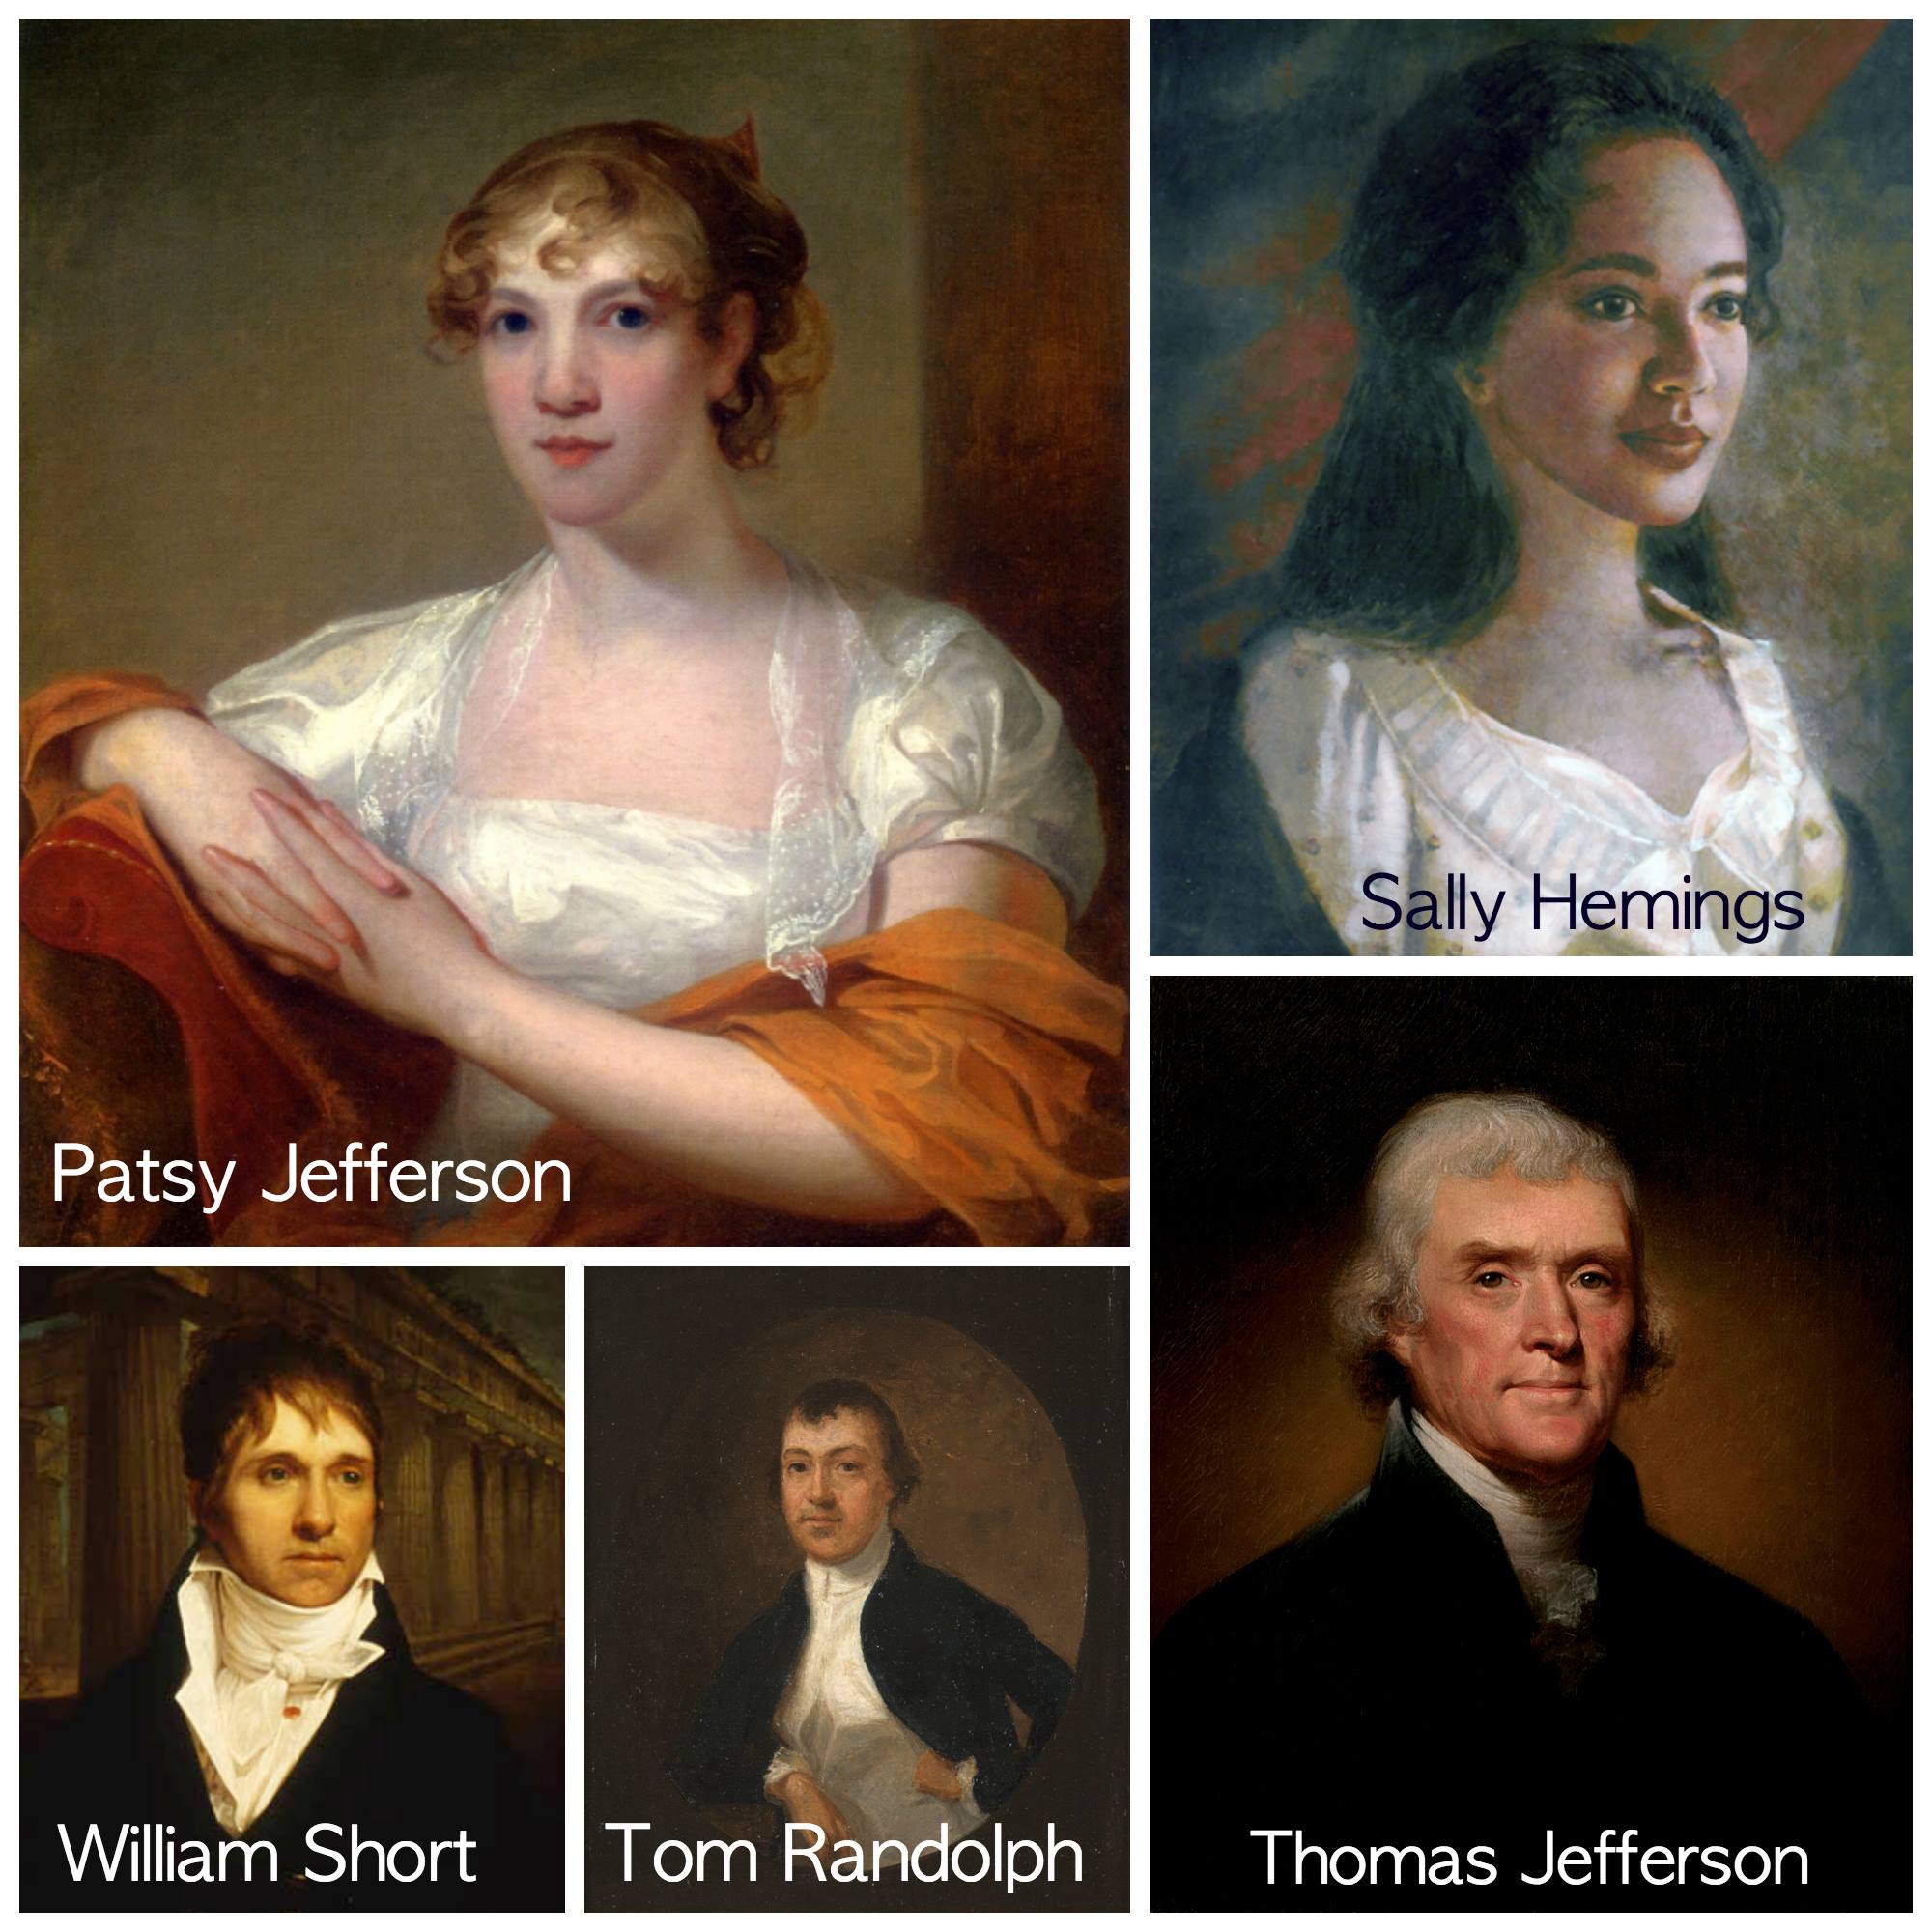 A collage of the painted portraits of several characters from America's First Daughter.